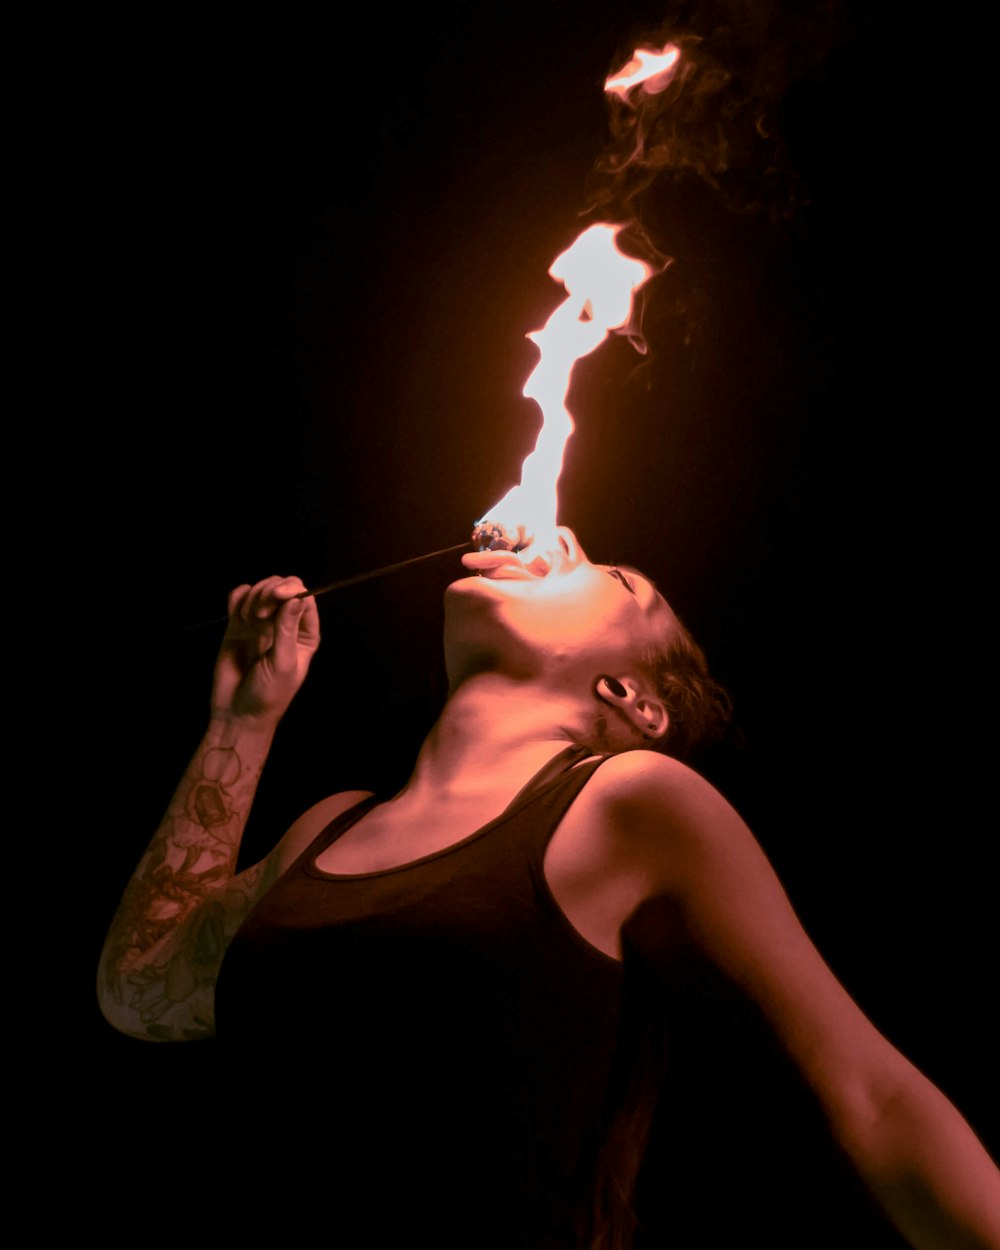 a woman holding a lit cigarette in her mouth